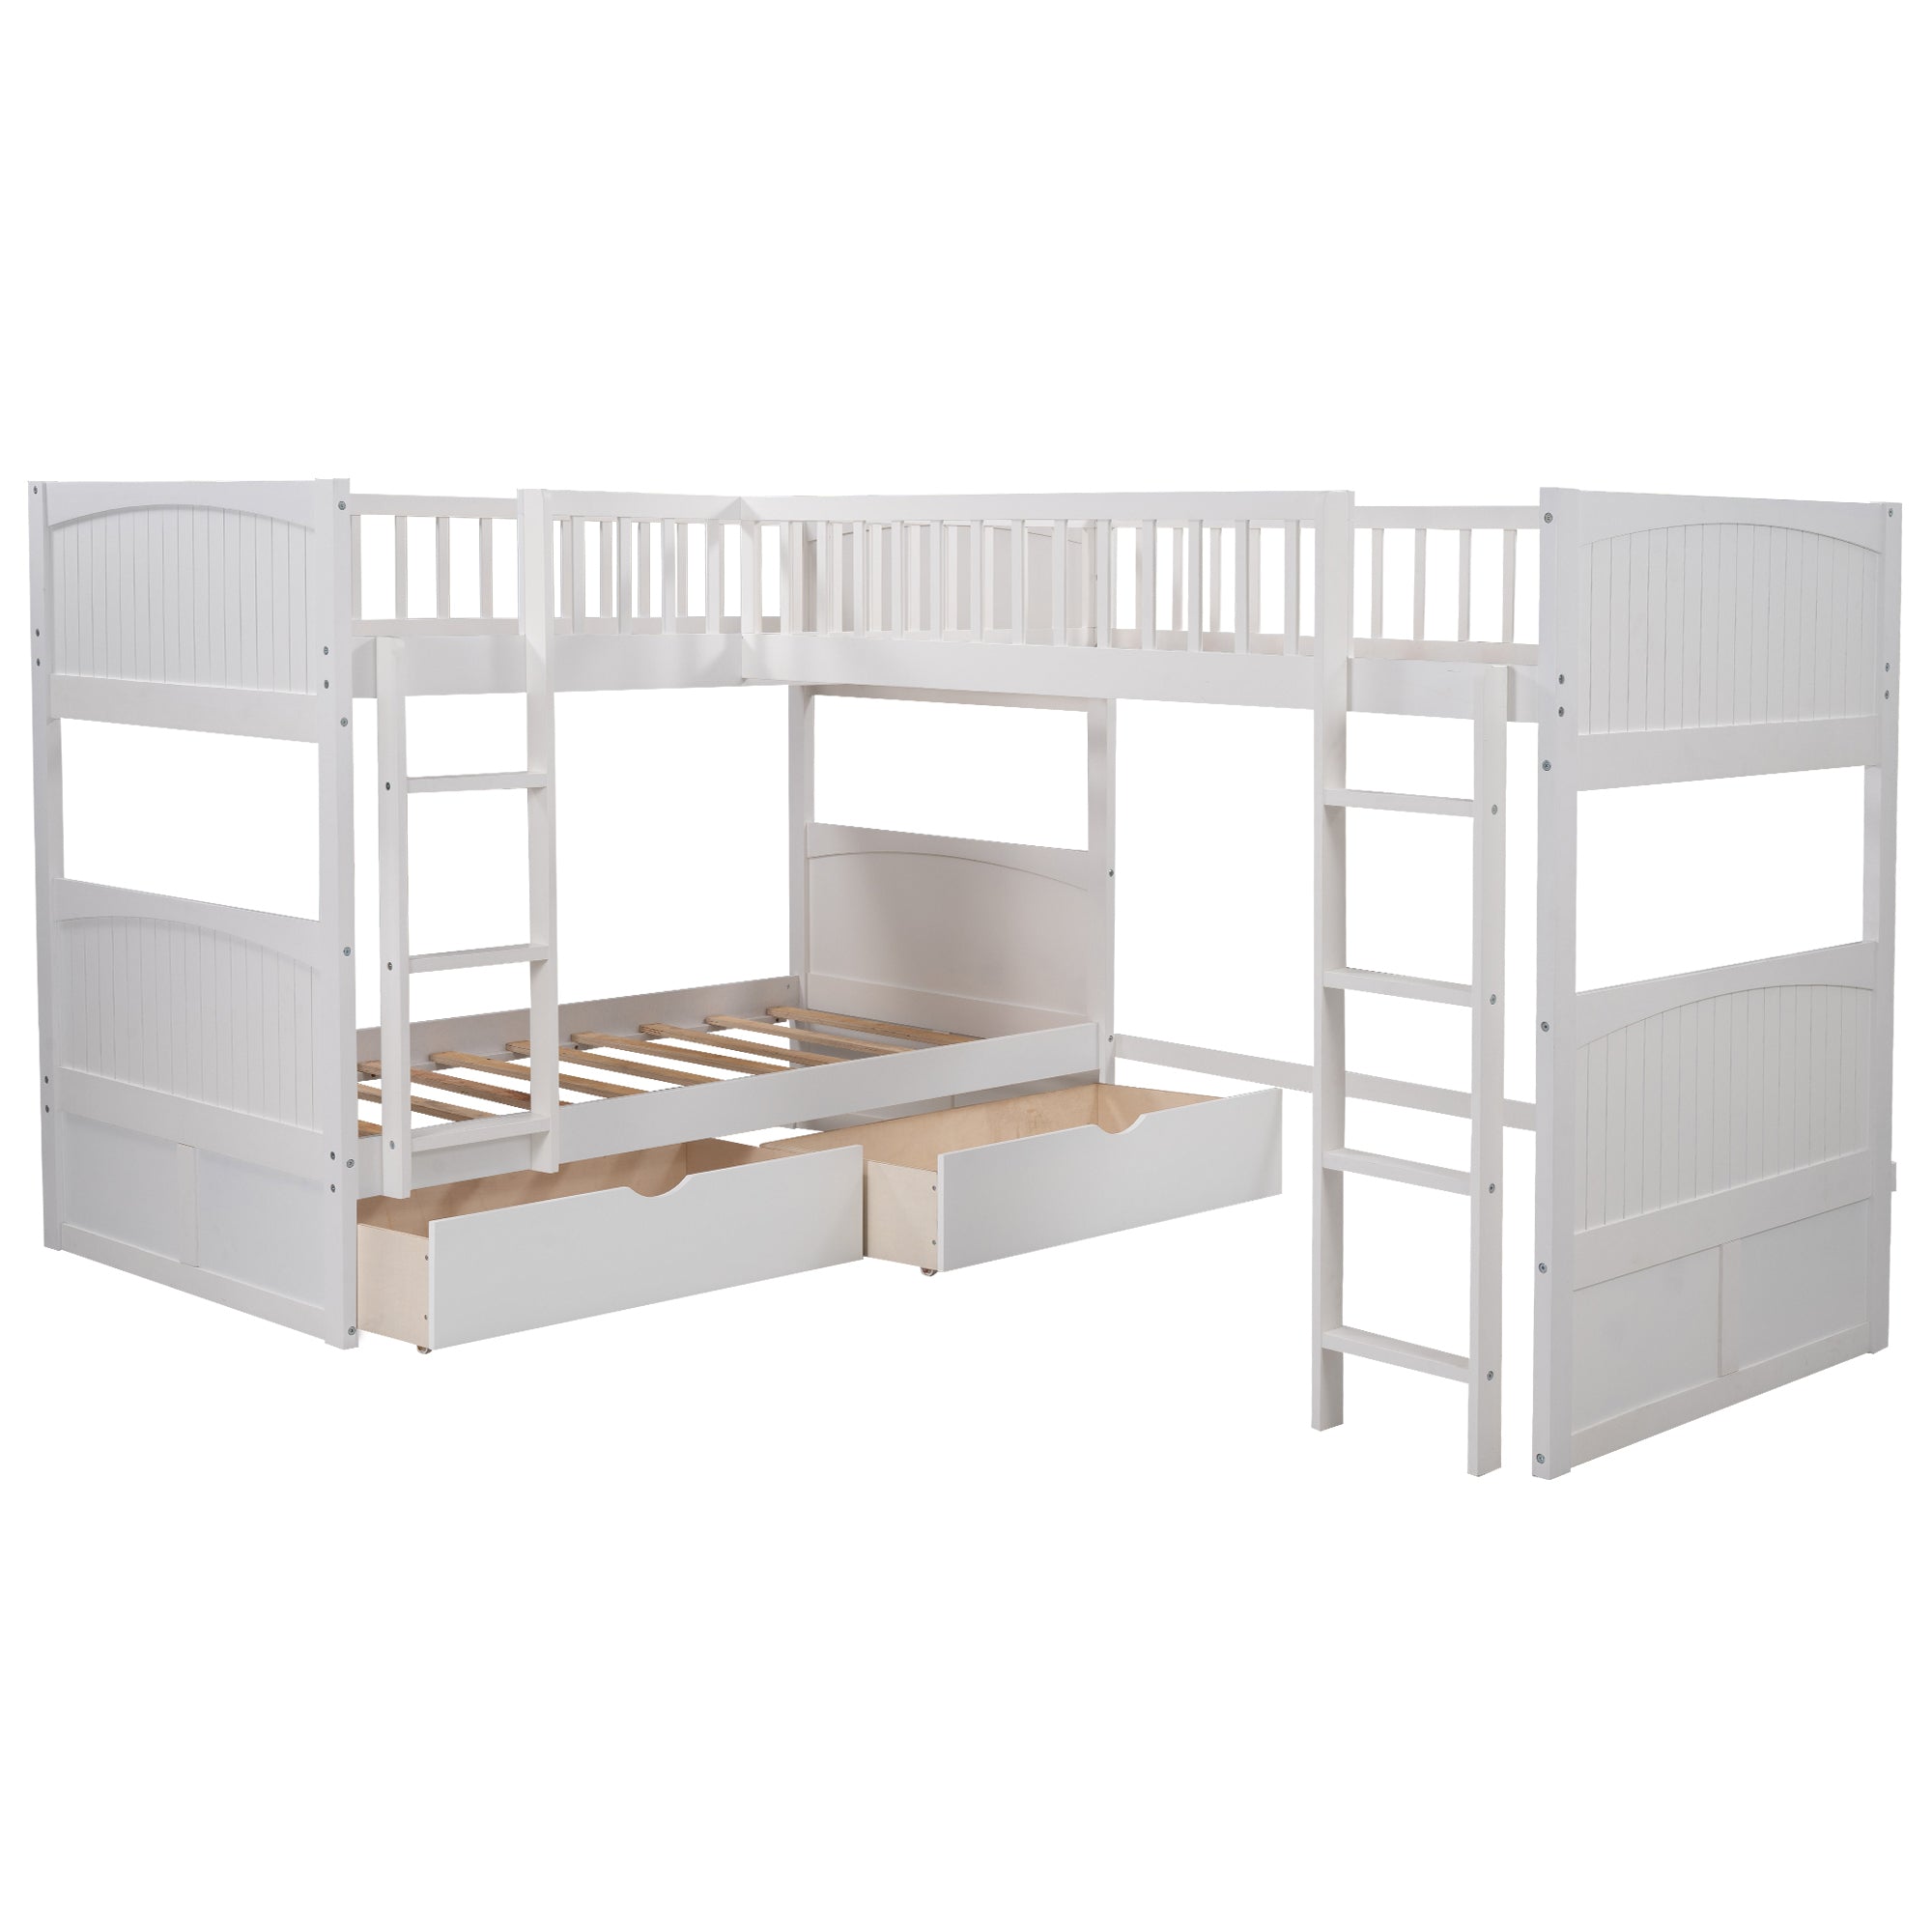 Twin Size Bunk Bed with a Loft Bed attached, with Two Drawers (White)